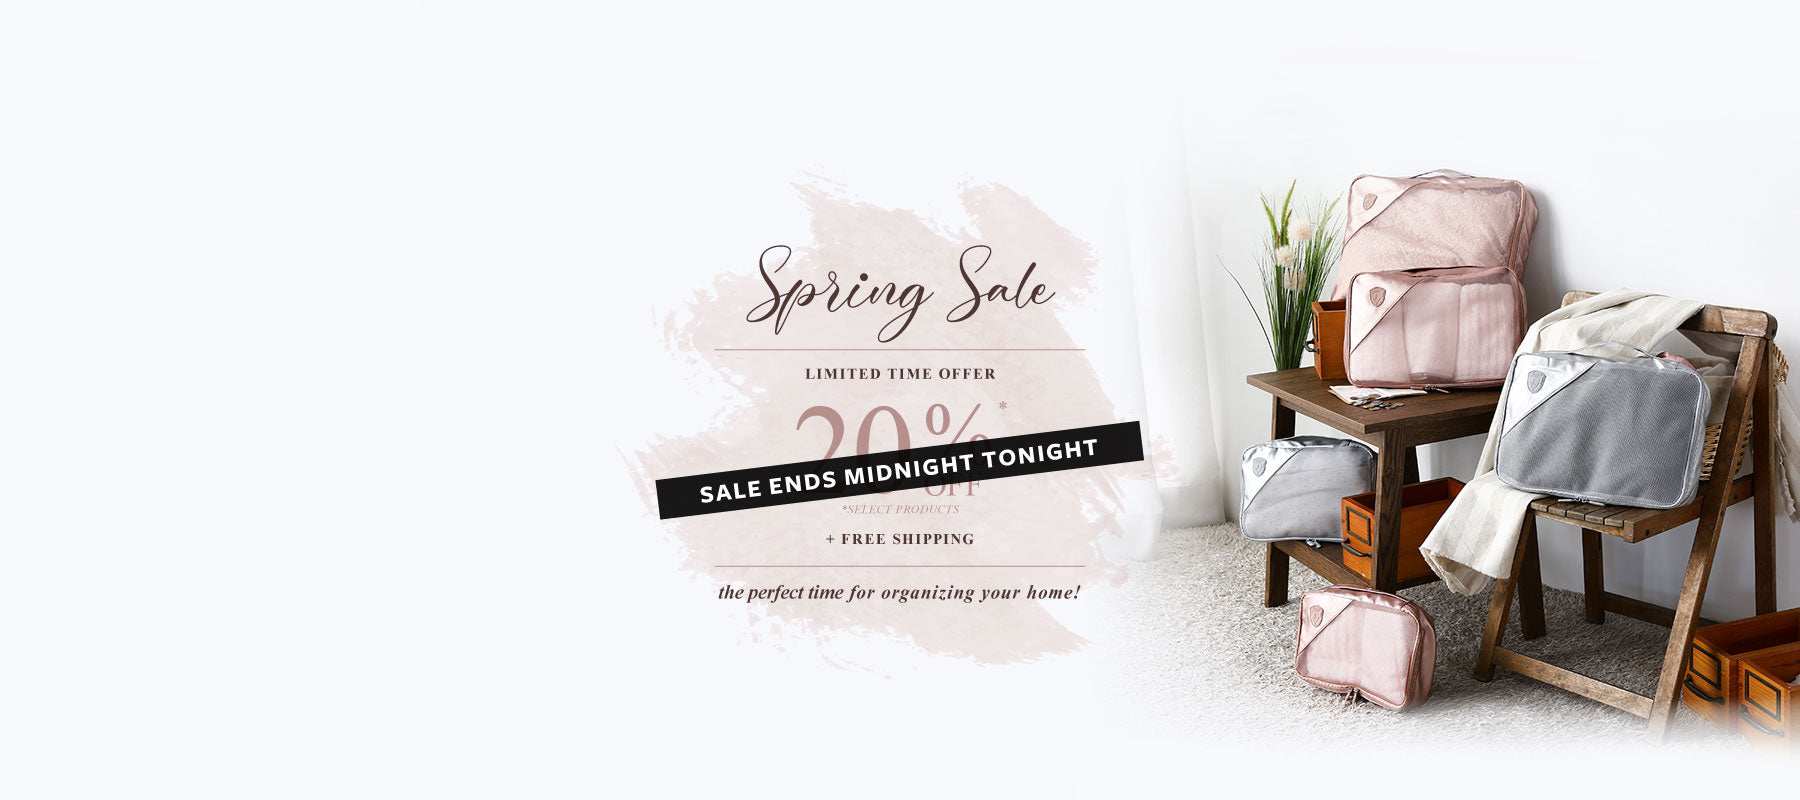 Spring Sale - By Price: Lowest to Highest